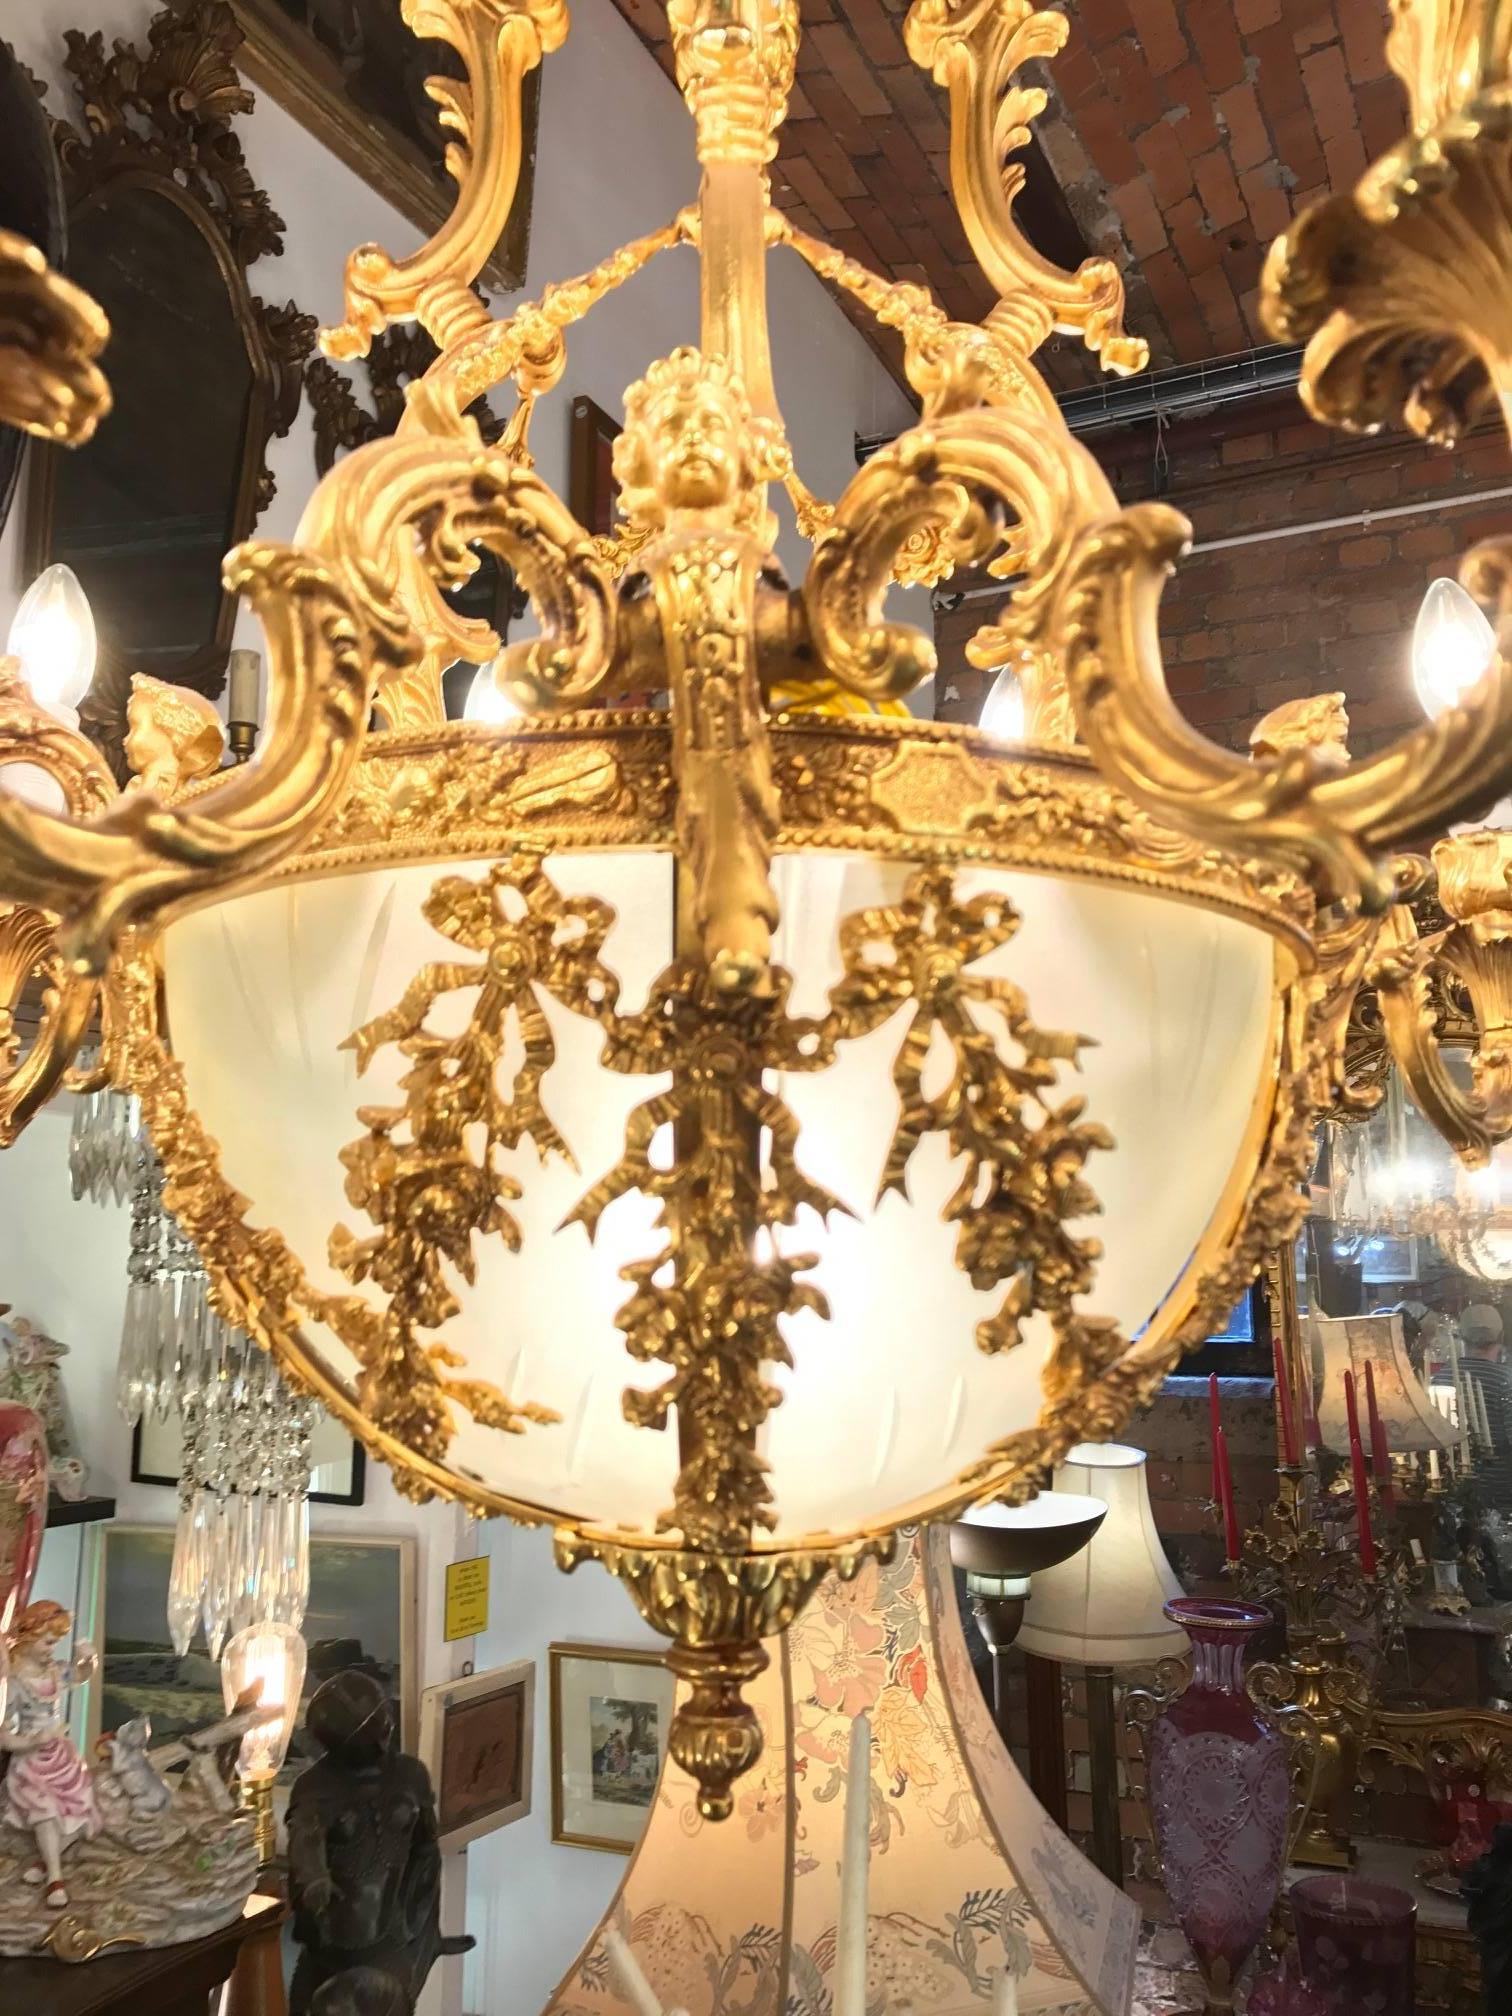 Baltic 20th Century Gilt Bronze Chandelier in Louis XVI Style For Sale